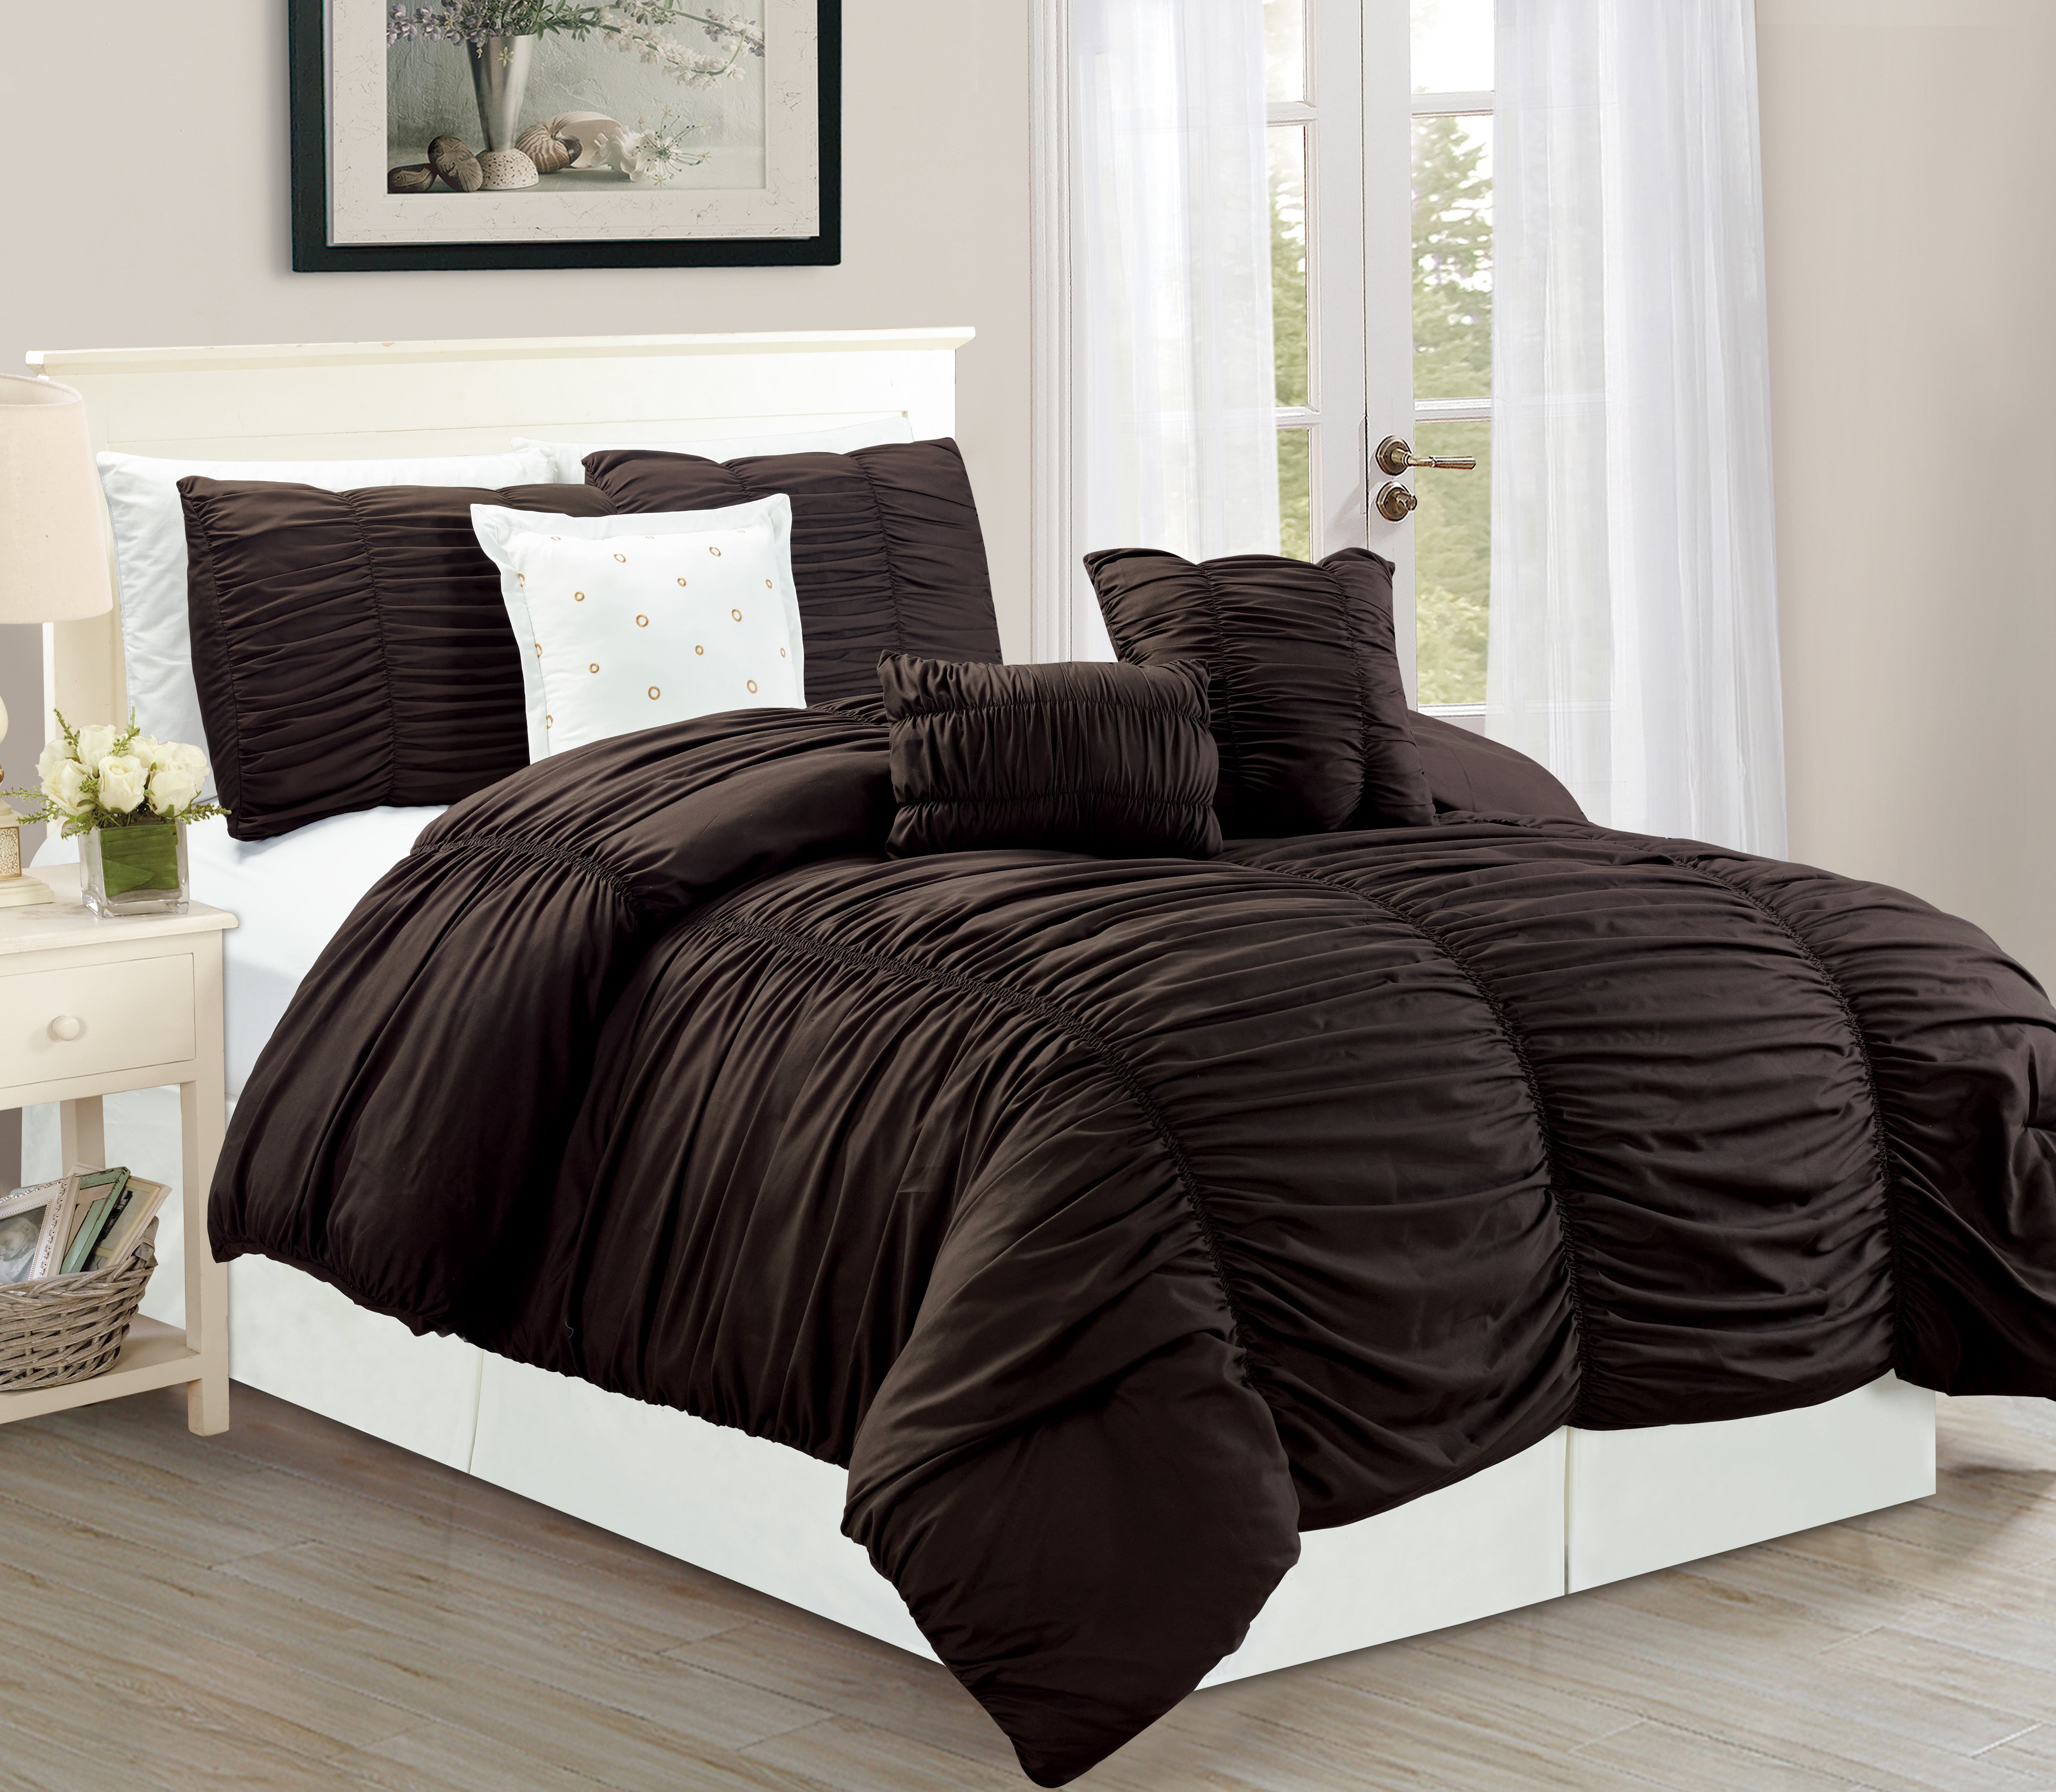 Luxury 7 PC 7 PCS Mocha Brown Micro Suede Bed In A Bag Comforter Set  New. 